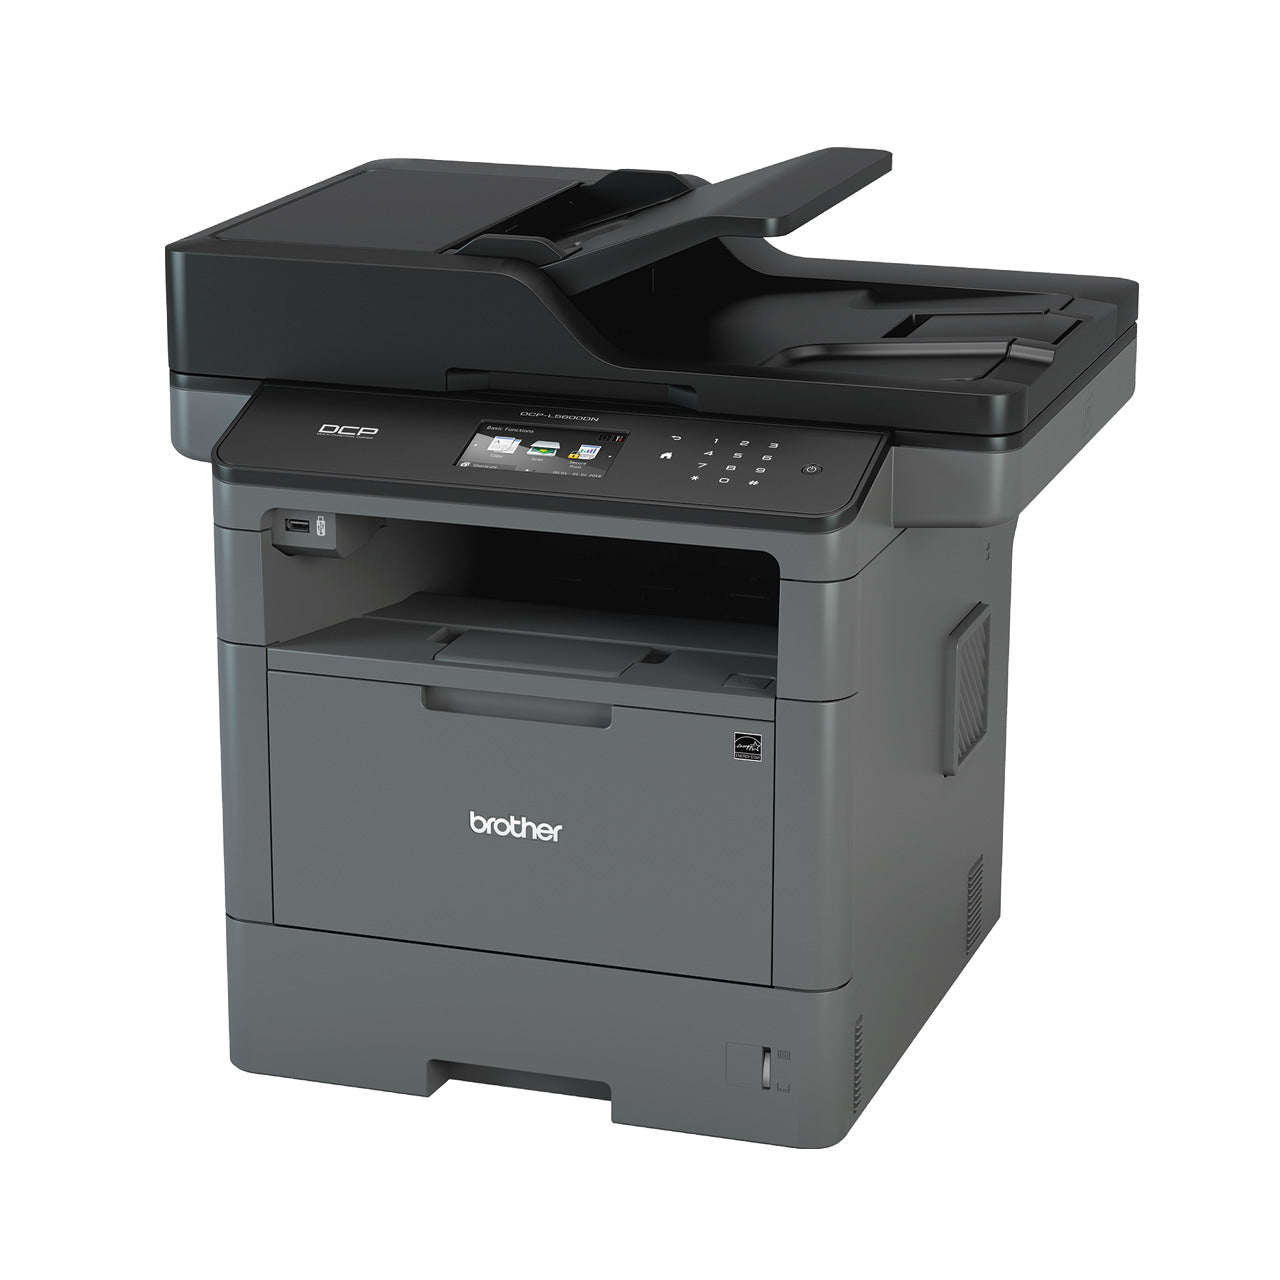 Brother DCP-L5600DN Laser Printer (DCP-L5600DN)